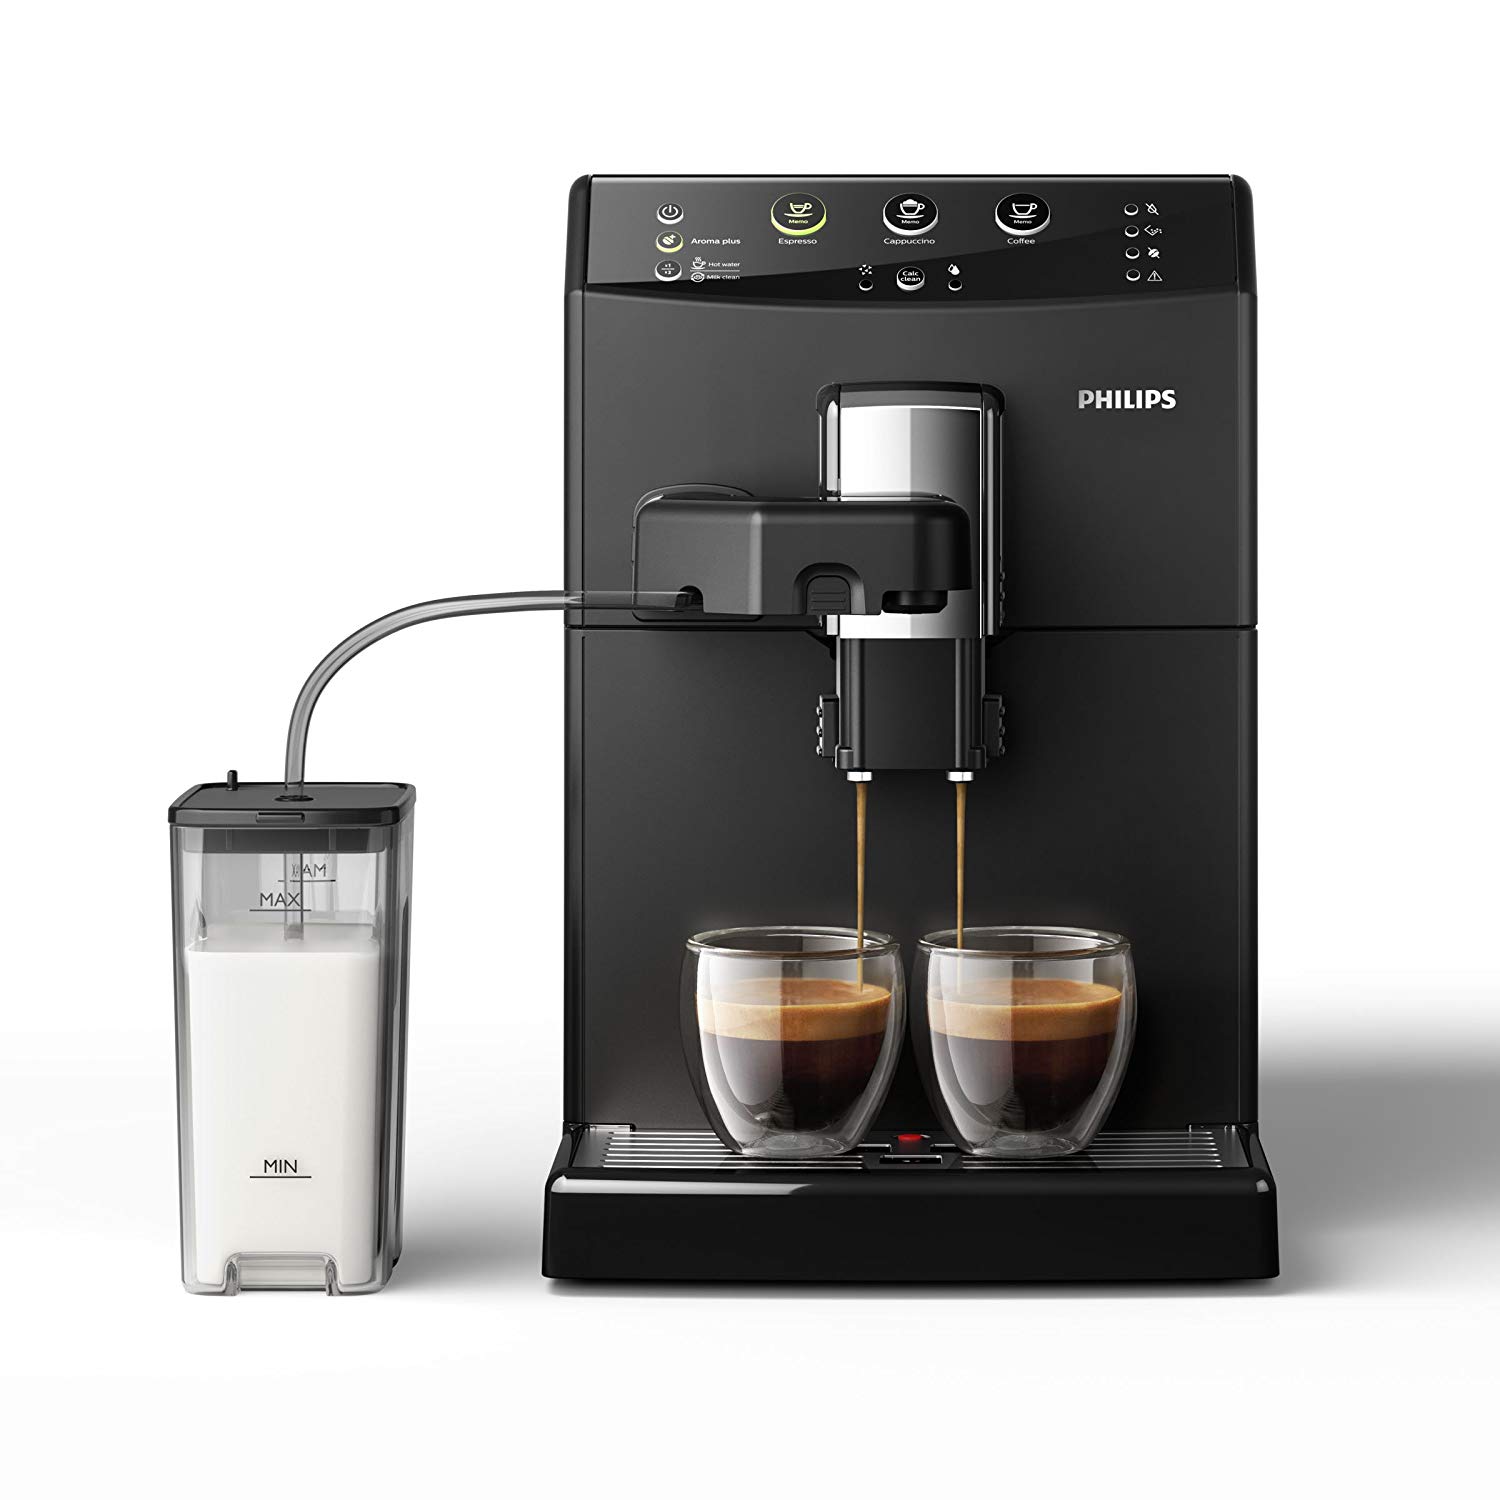 Philips Fully Automatic Coffee Machine [Energy Class A]